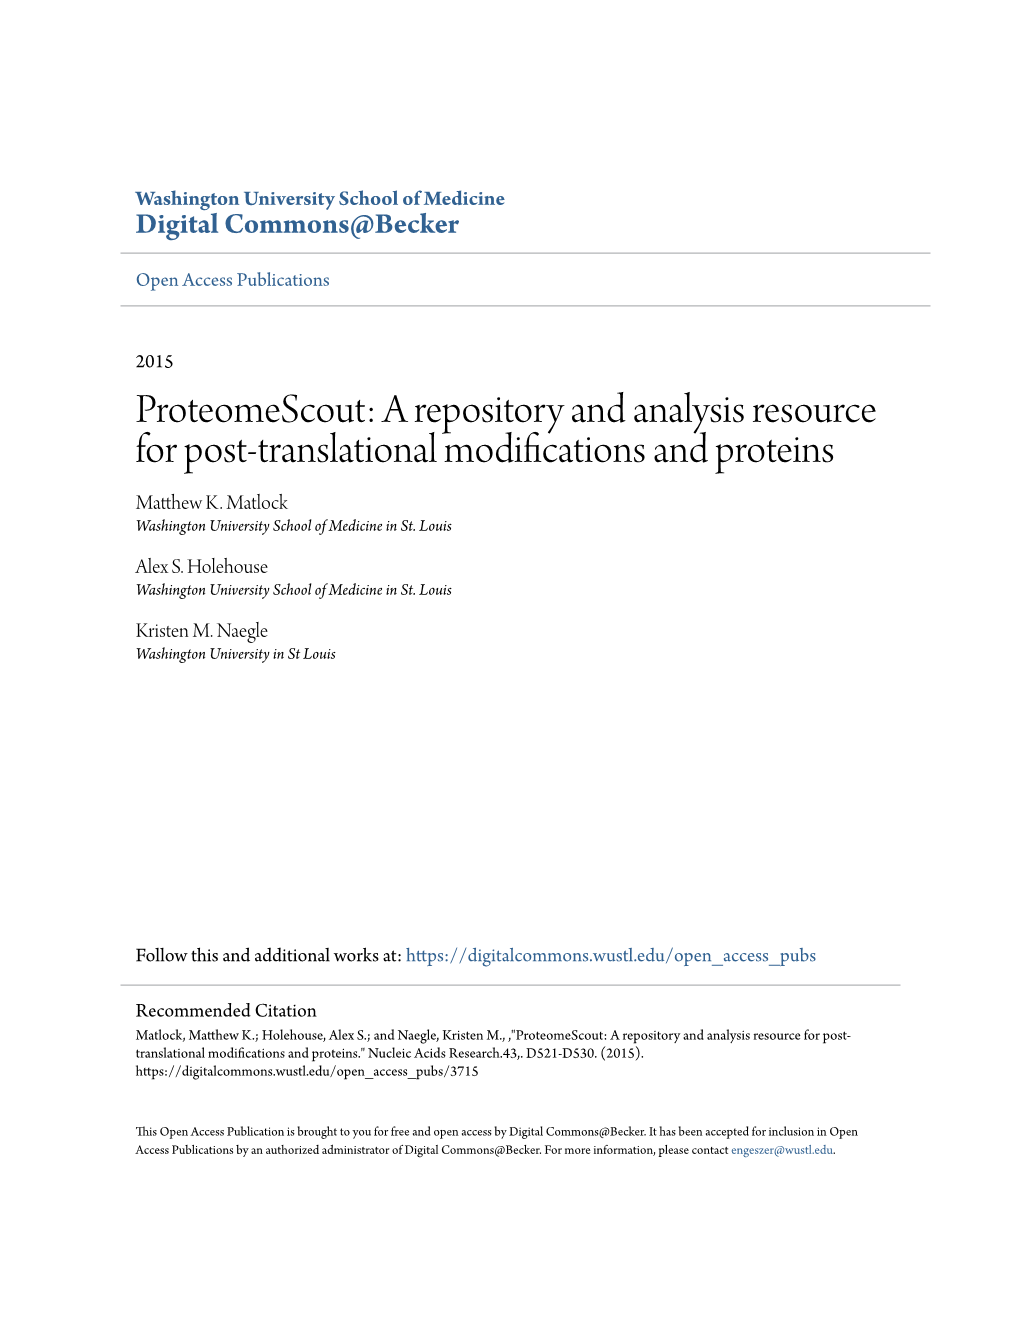 A Repository and Analysis Resource for Post-Translational Modifications and Proteins Matthew K